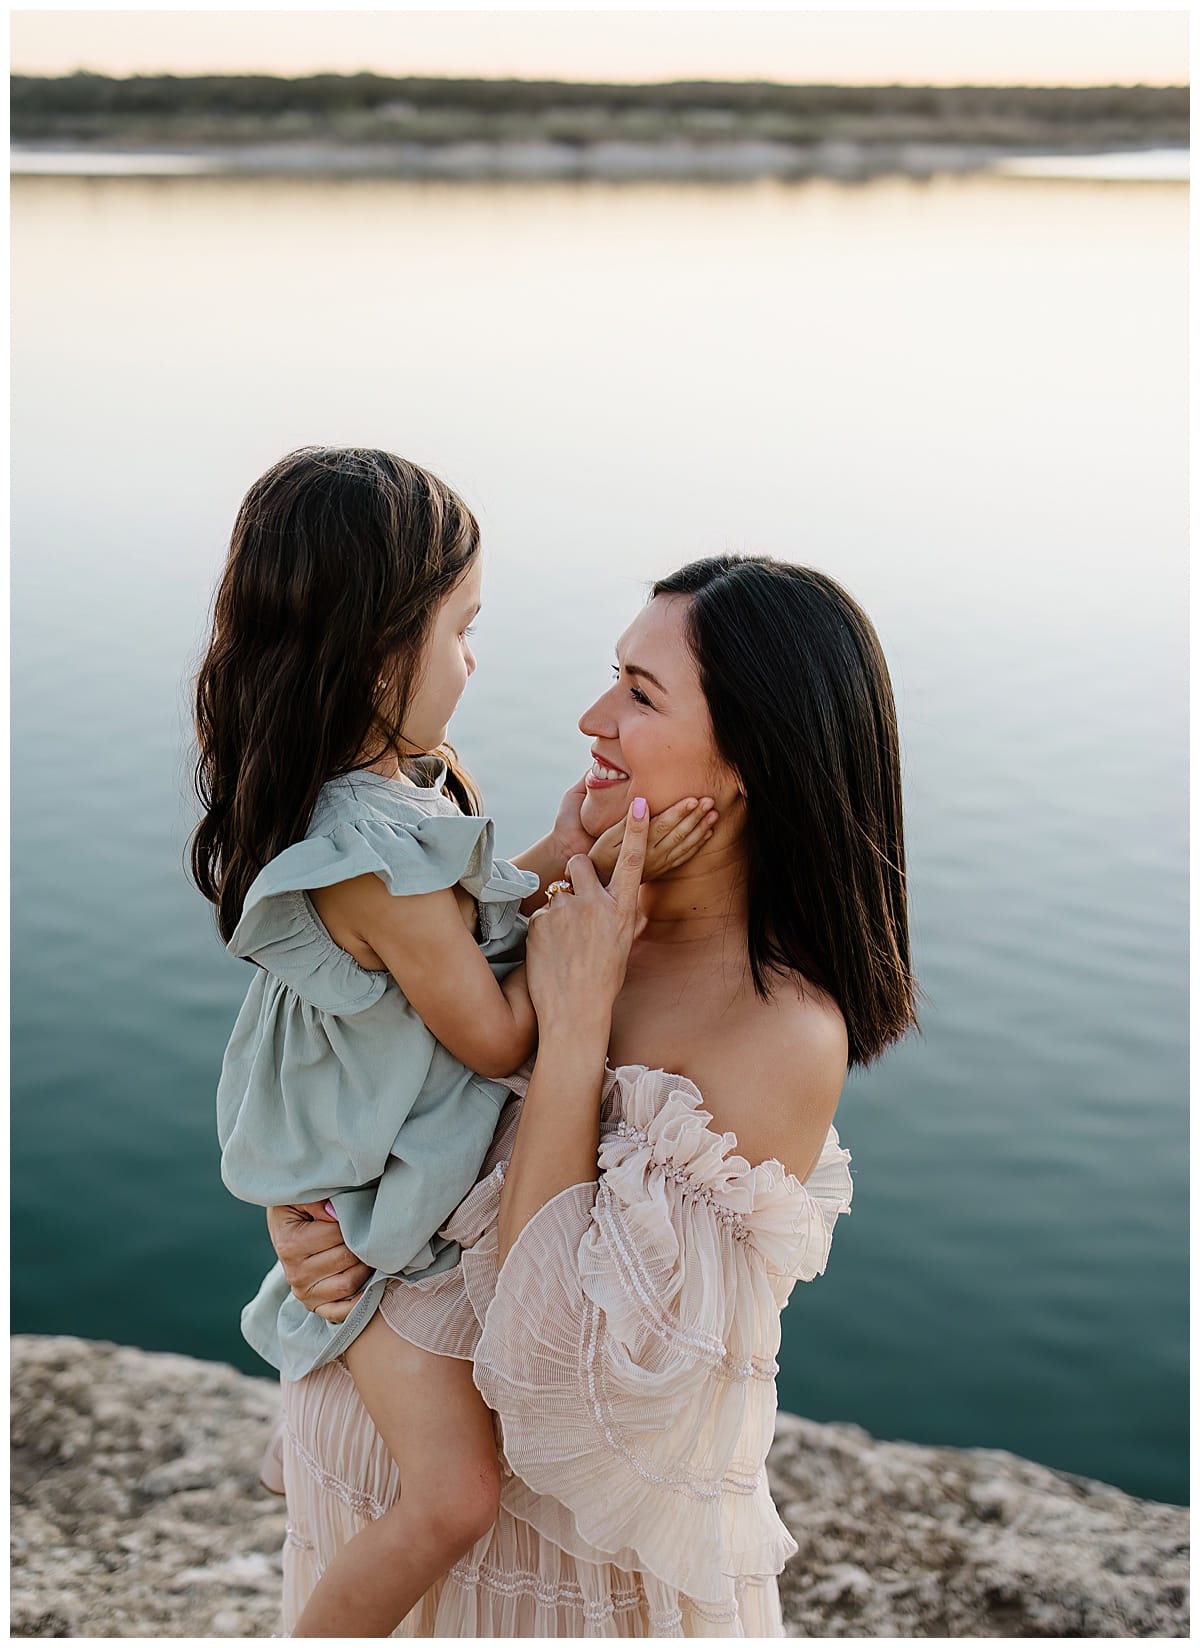 Mom and daughter smile at each other during their outdoor lifestyle photoshoot